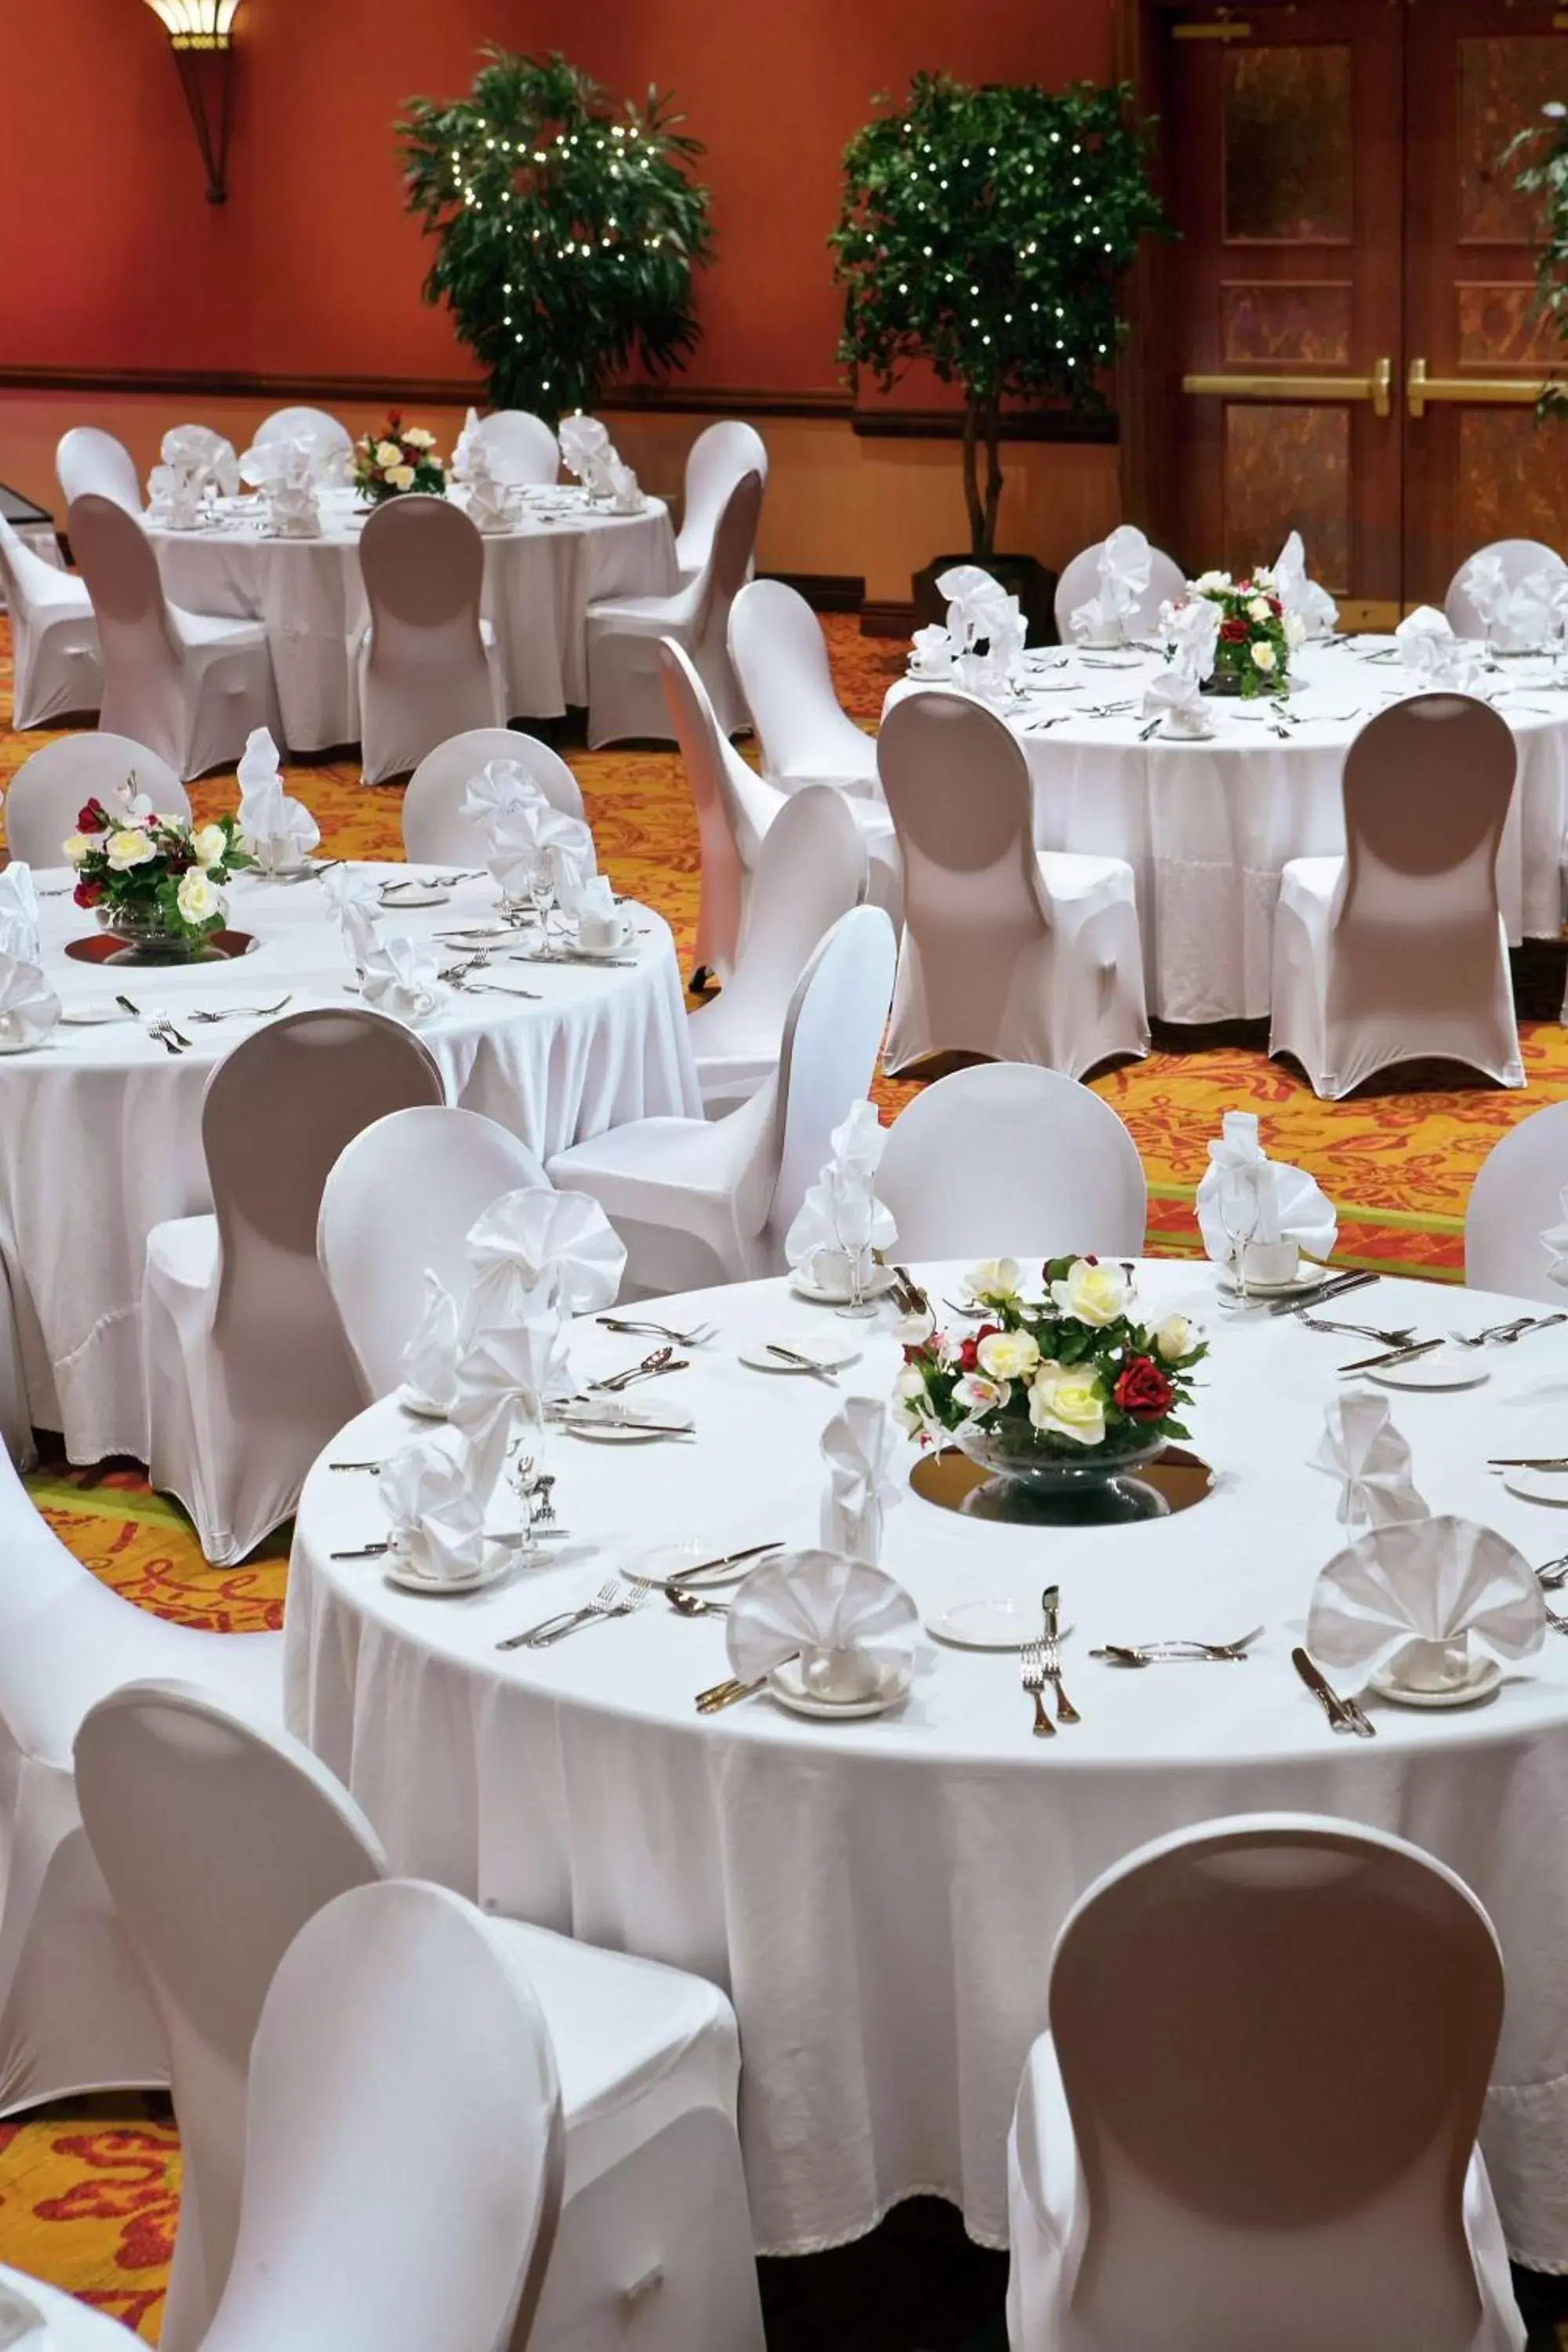 Meeting/conference room, Banquet Facilities in Embassy Suites by Hilton Norman Hotel & Conference Center